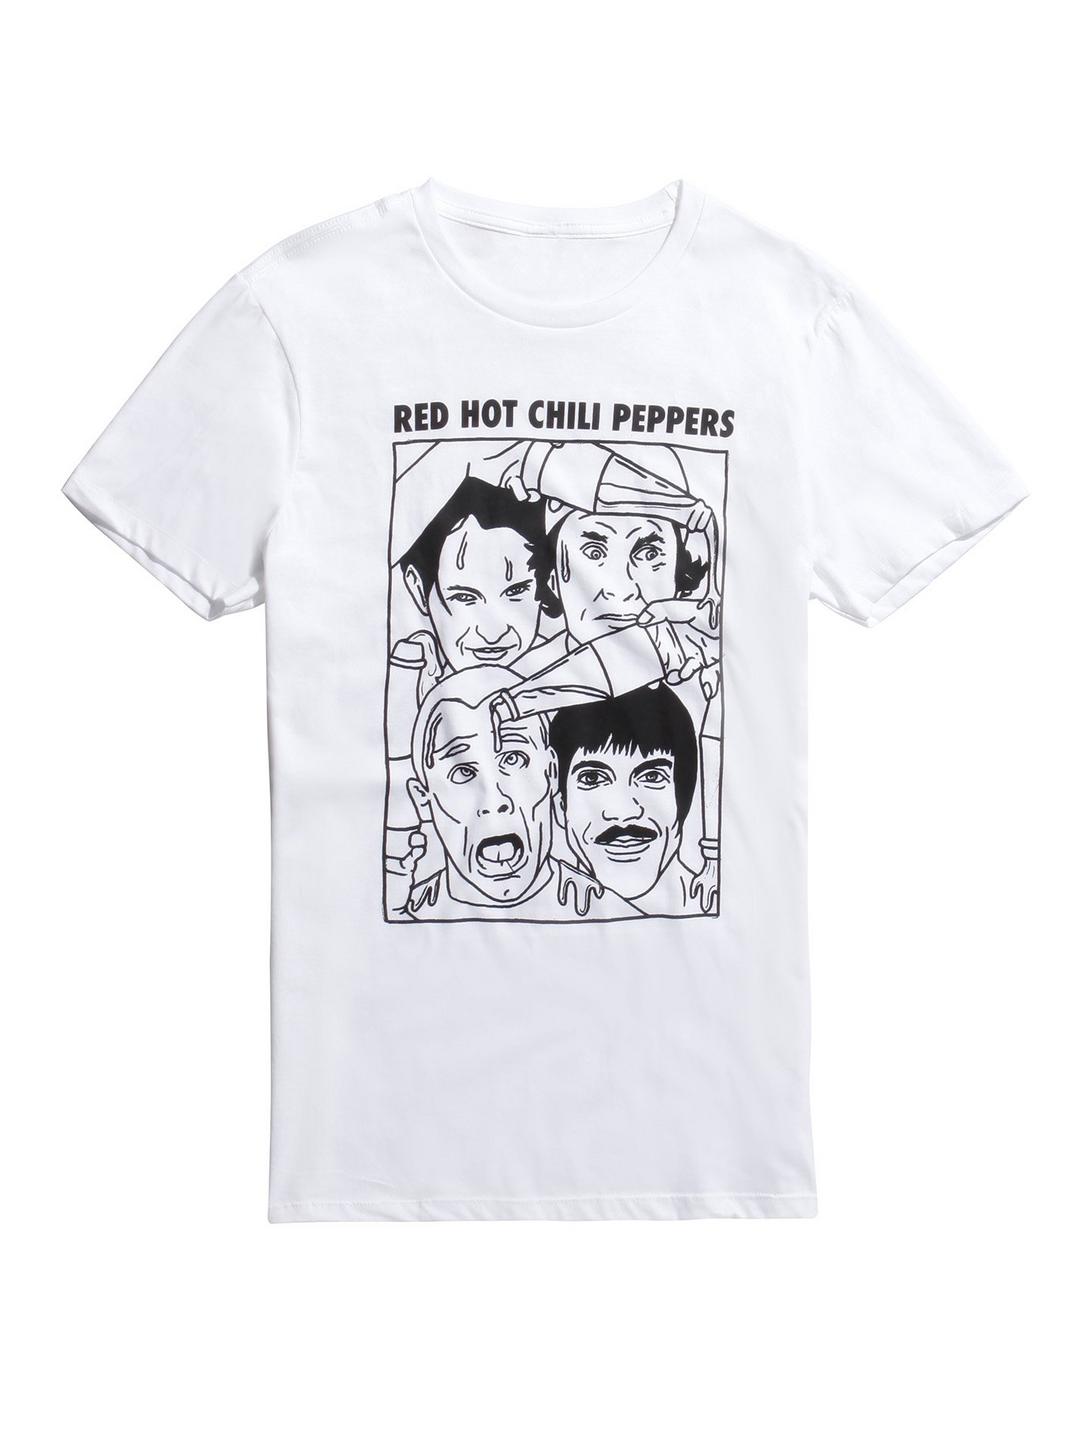 Red Hot Chili Peppers Line Drawing T-Shirt, WHITE, hi-res